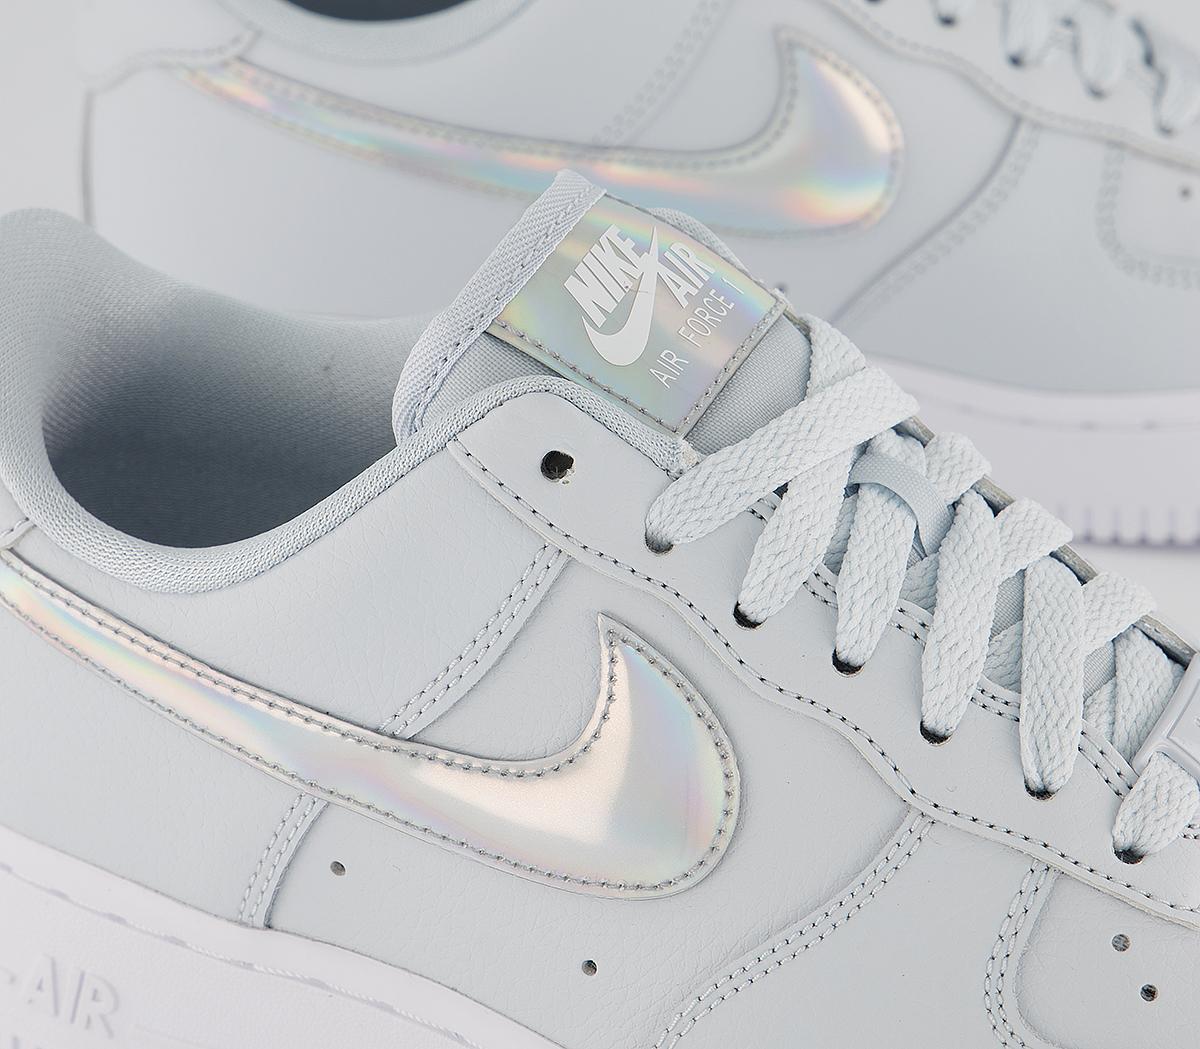 nike air force 1 07 trainers aura irridescent white f